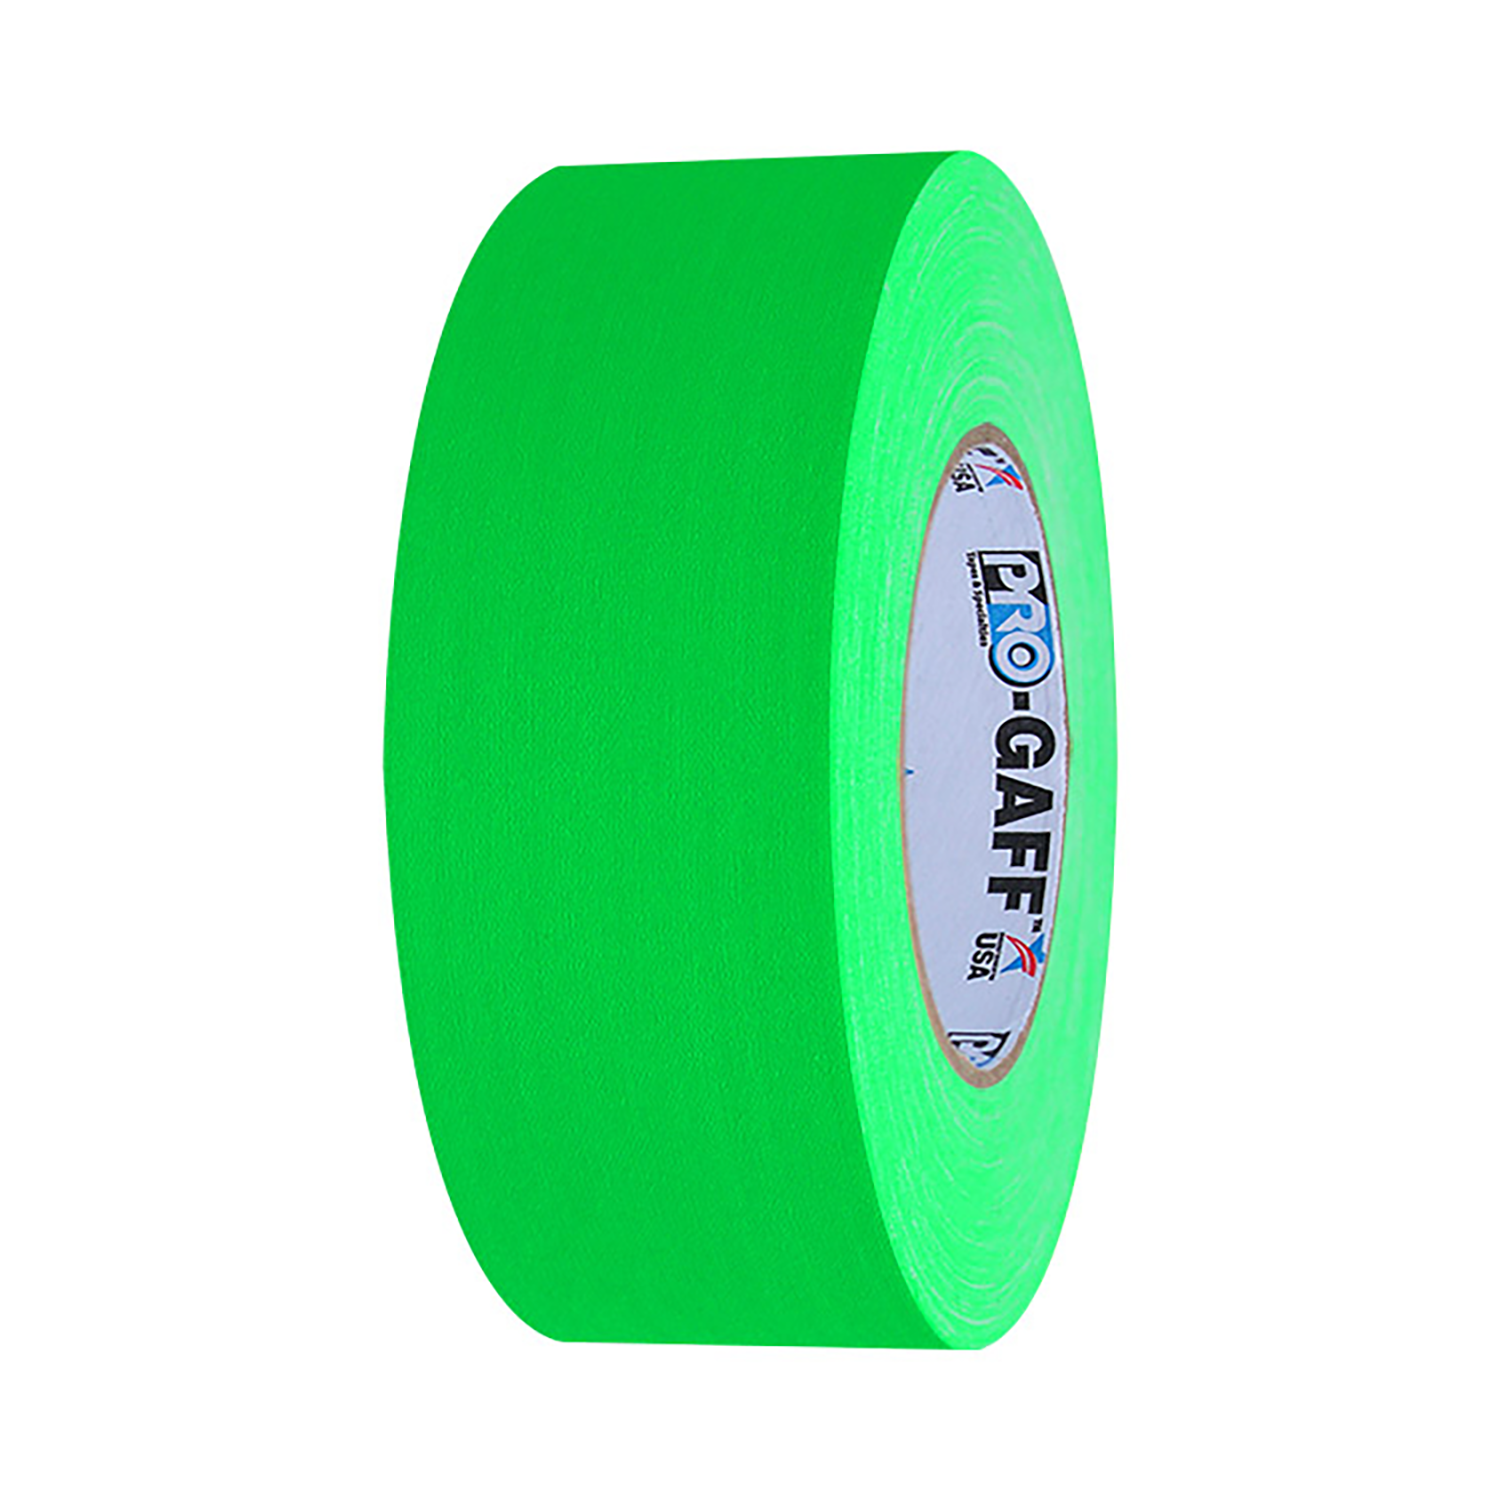 Pro Gaff Tape Cloth - Fluorescent Green - 50 Yards - 1"